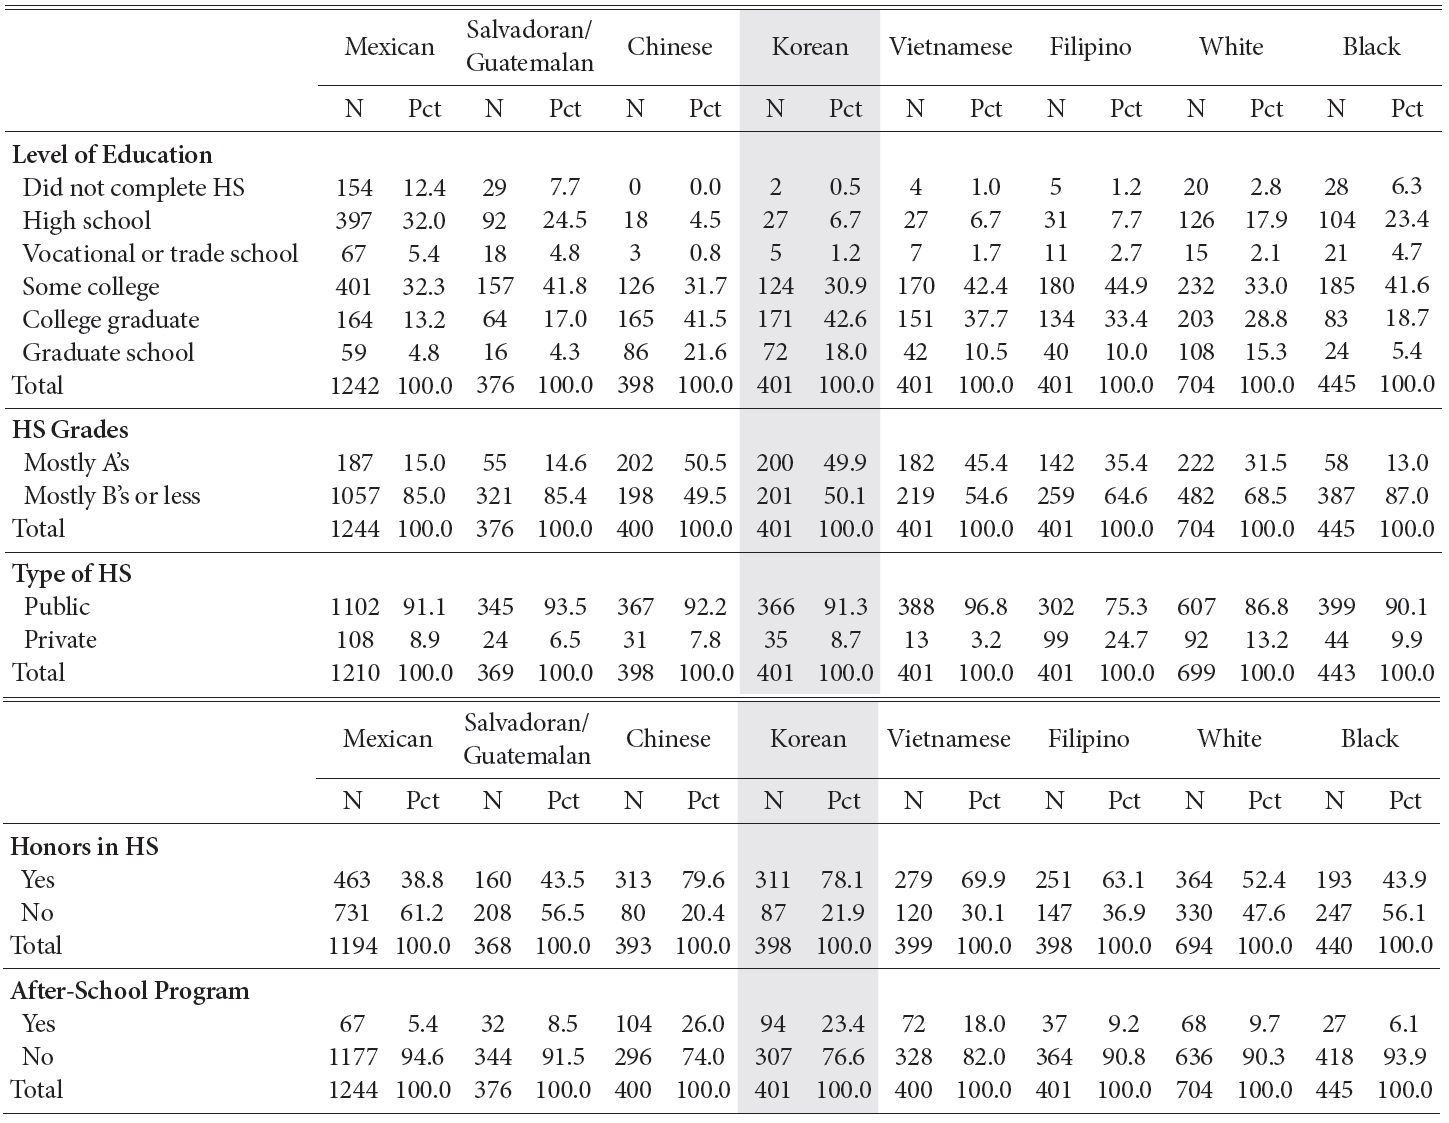 Unweighed Percentage Distribution and Sample Size of Level of Education, High School Grades, Type of High School, Honors, and Non-English Language After-School Program by Eight Main Ethnic Groups (2004 IIMMLA)